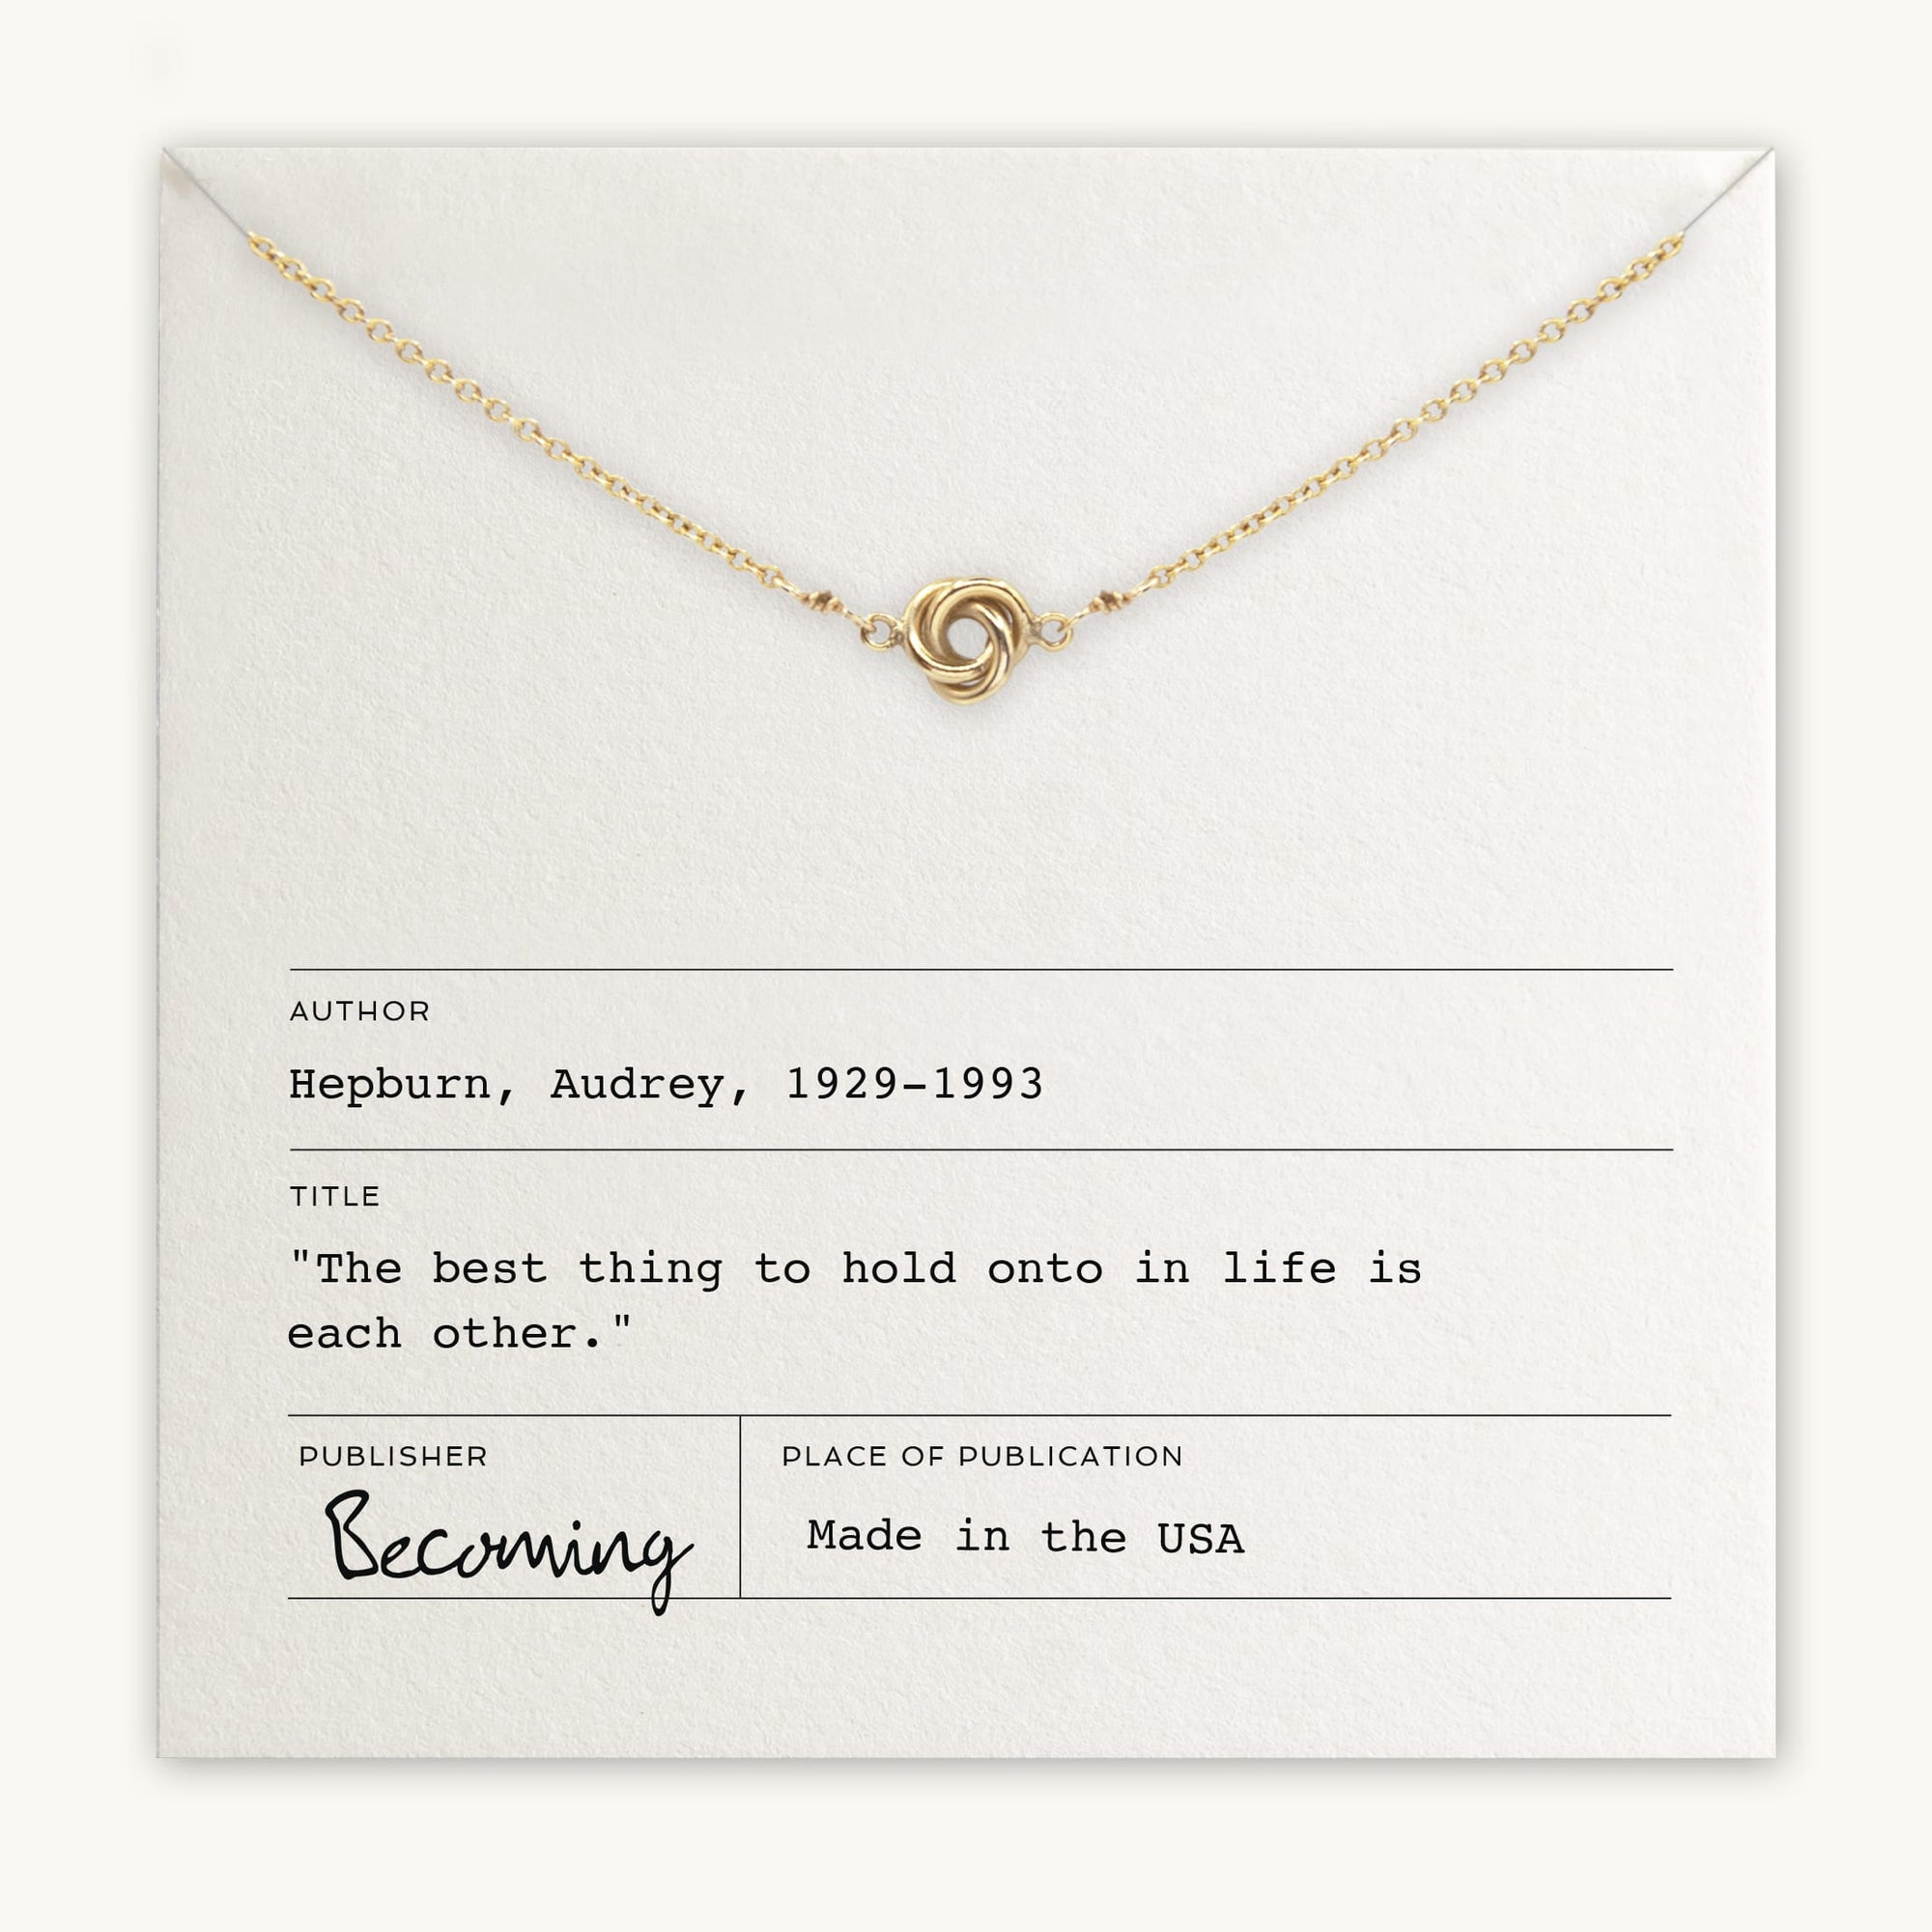 Becoming Jewelry&#39;s Love Knot Necklace with a knot pendant displayed on a card with an Audrey Hepburn quote.